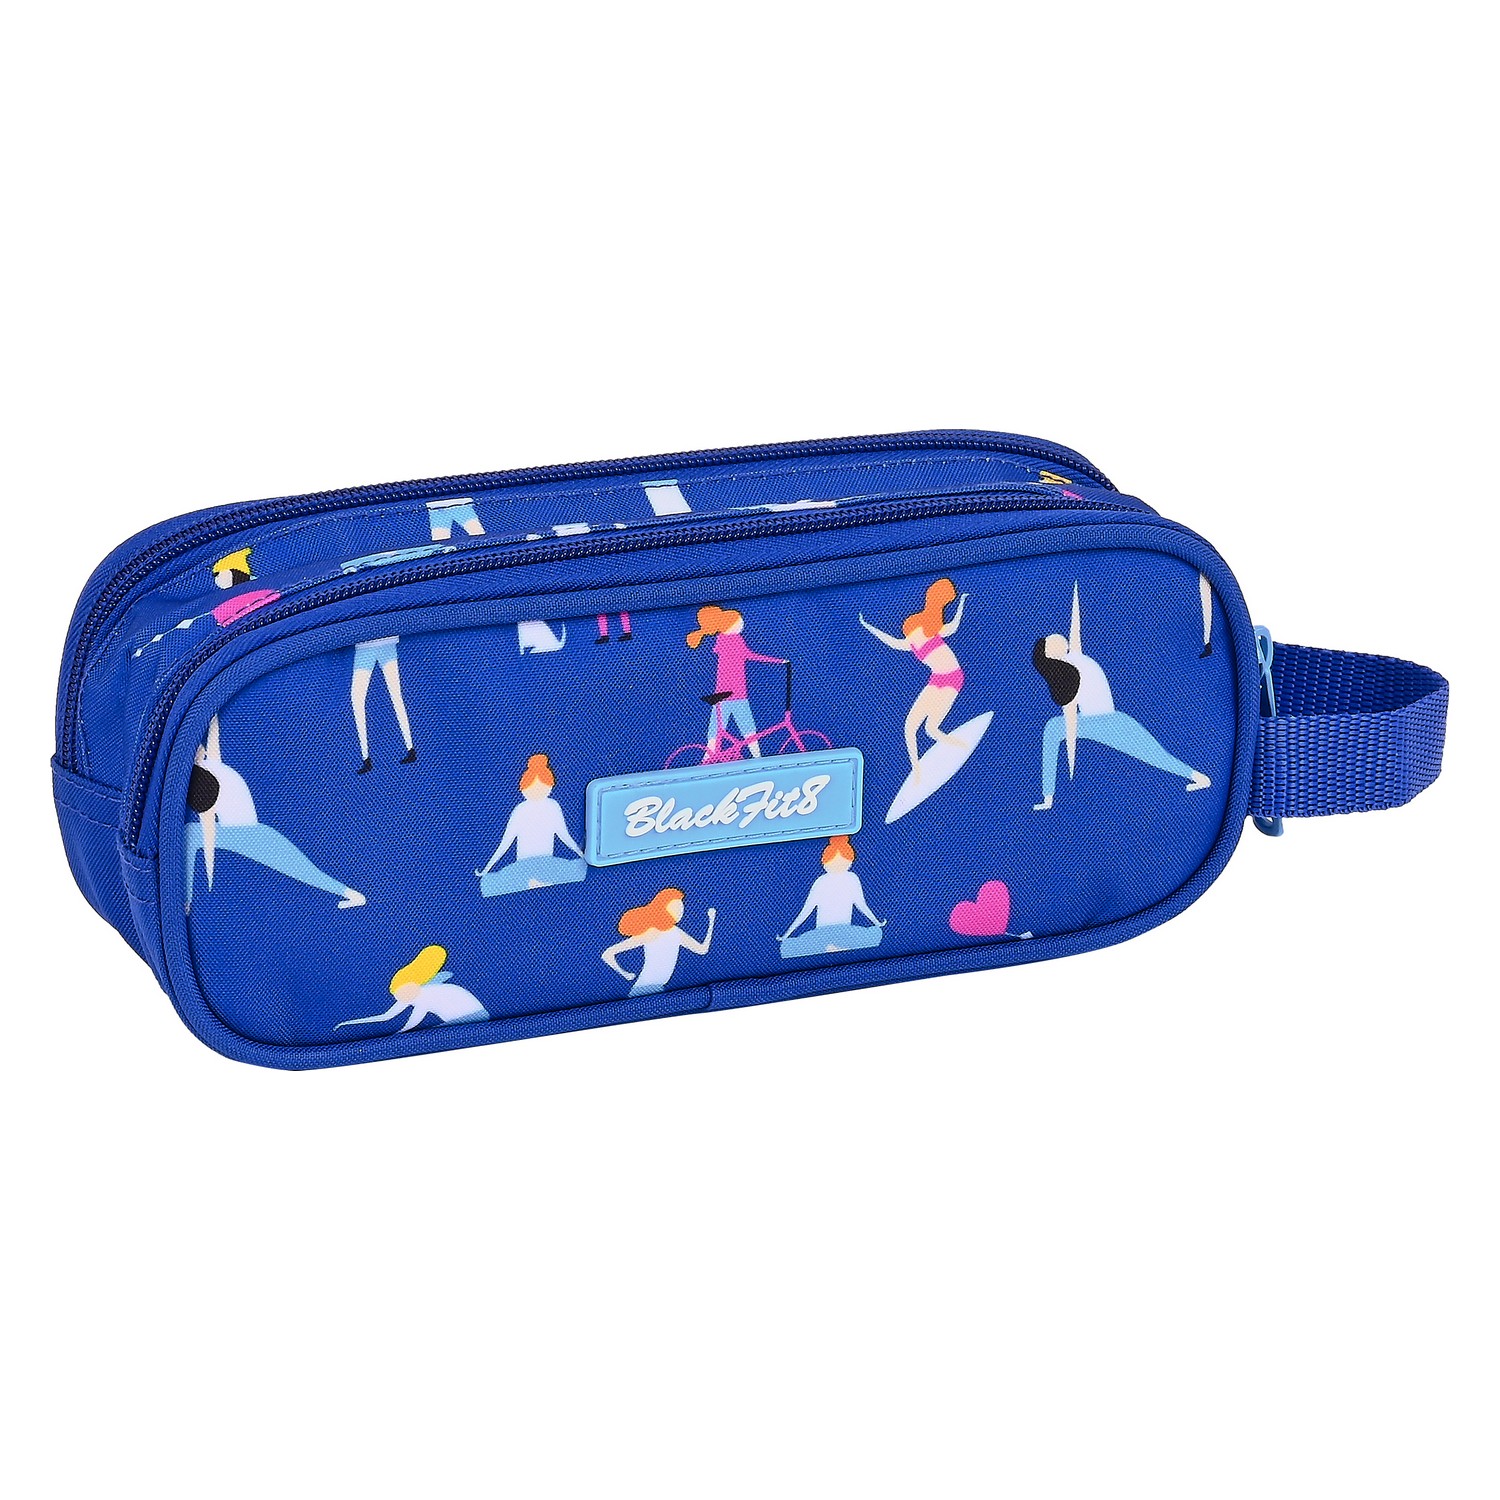 Double Carry-all Go Girls BlackFit8 ‎842140513 Blue